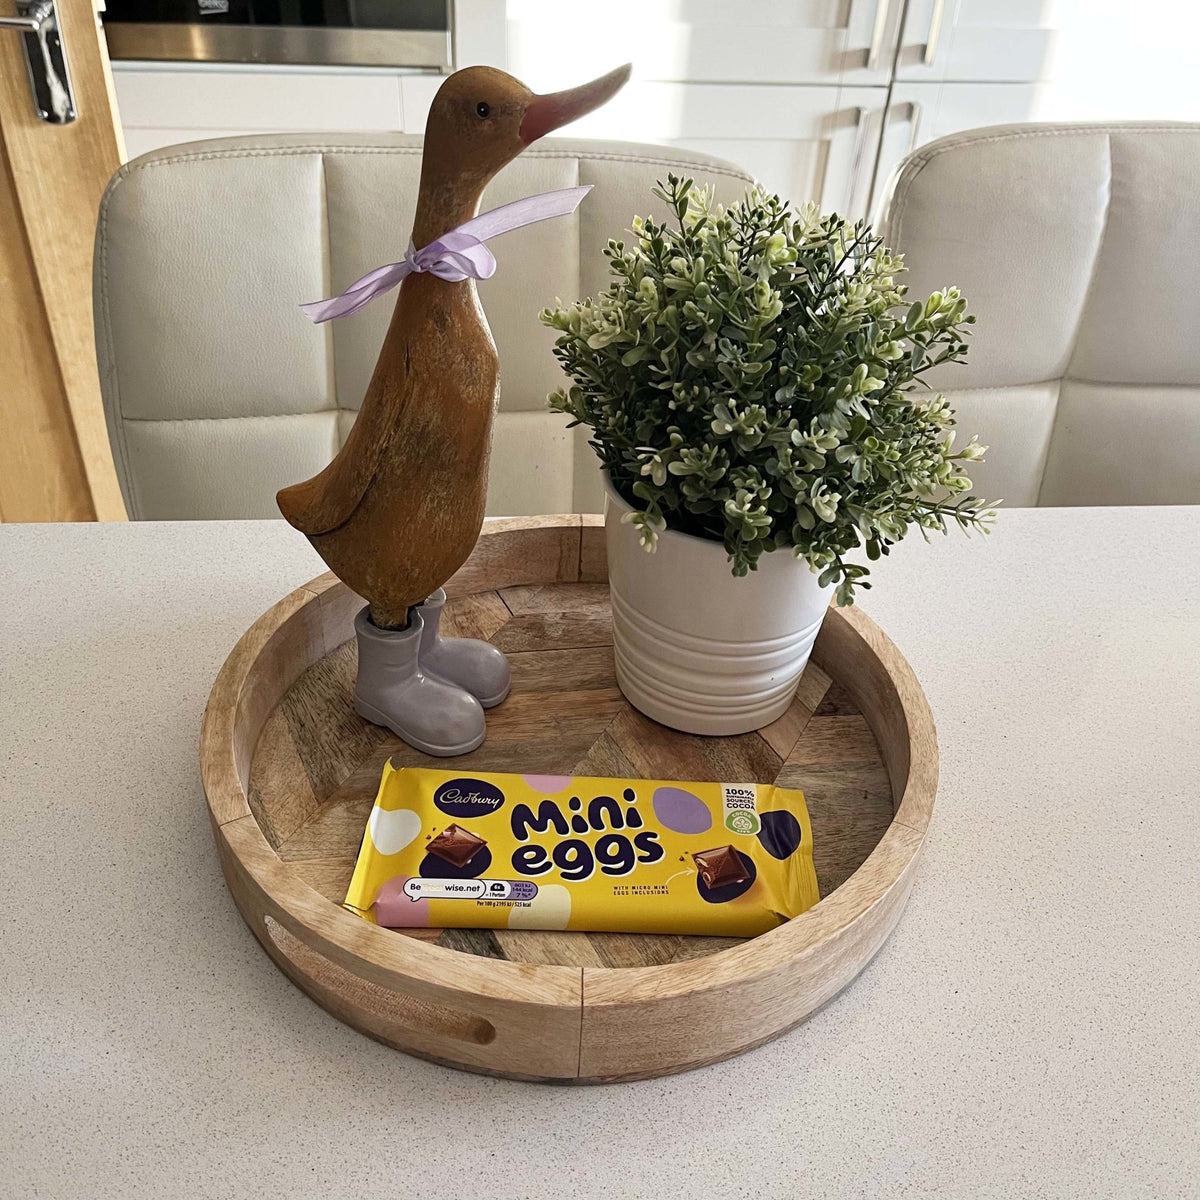 Darcey Duck on our Herringbone Wood Tray with white planter and Mini Eggs Chocolate bar